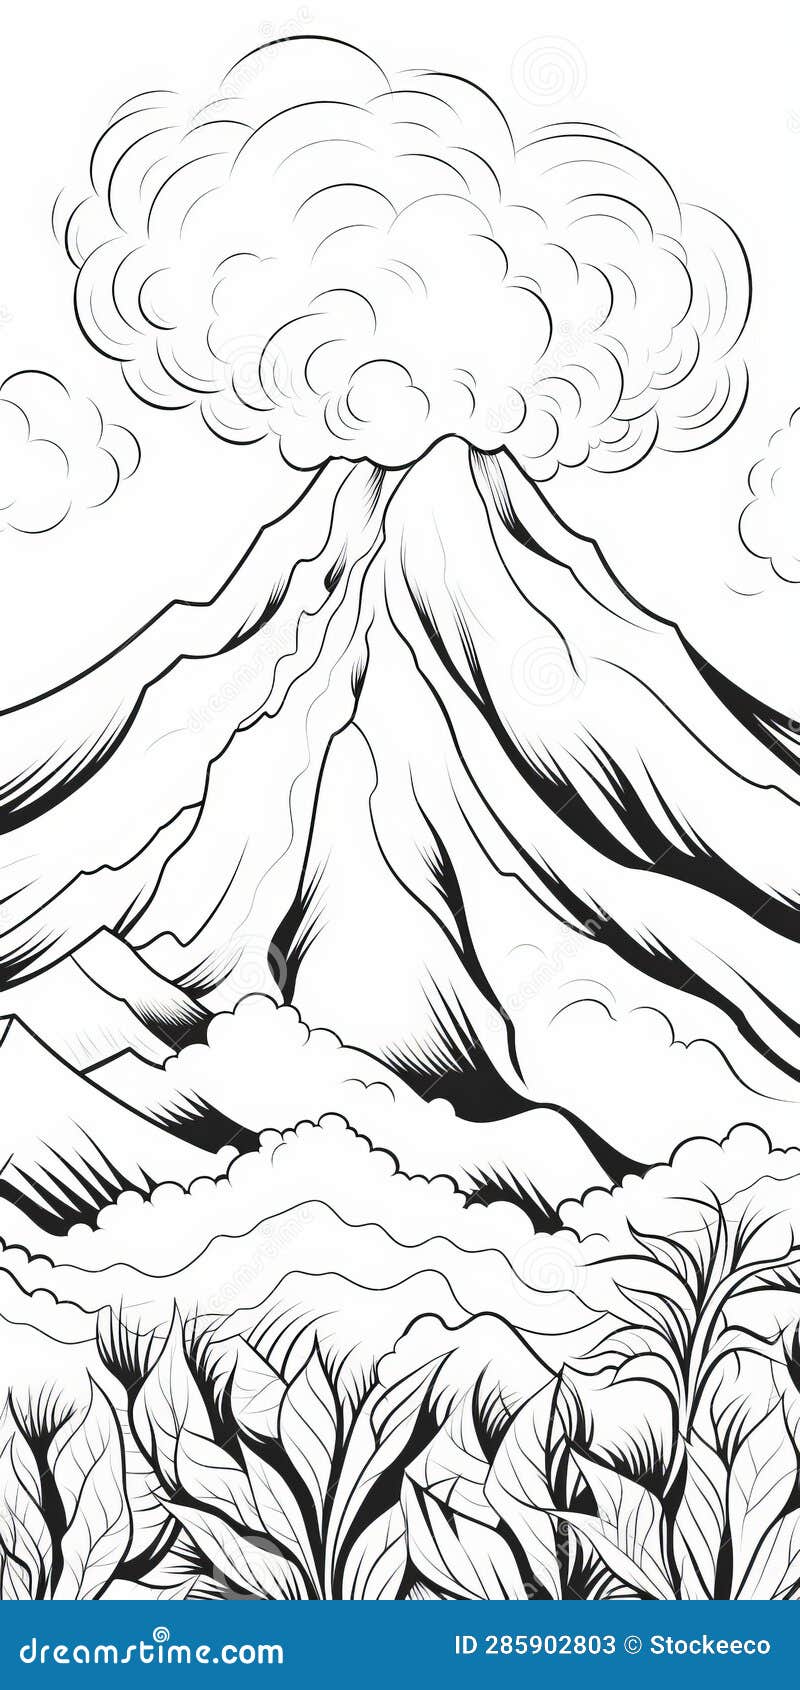 Serene volcano coloring page for adults stock illustration